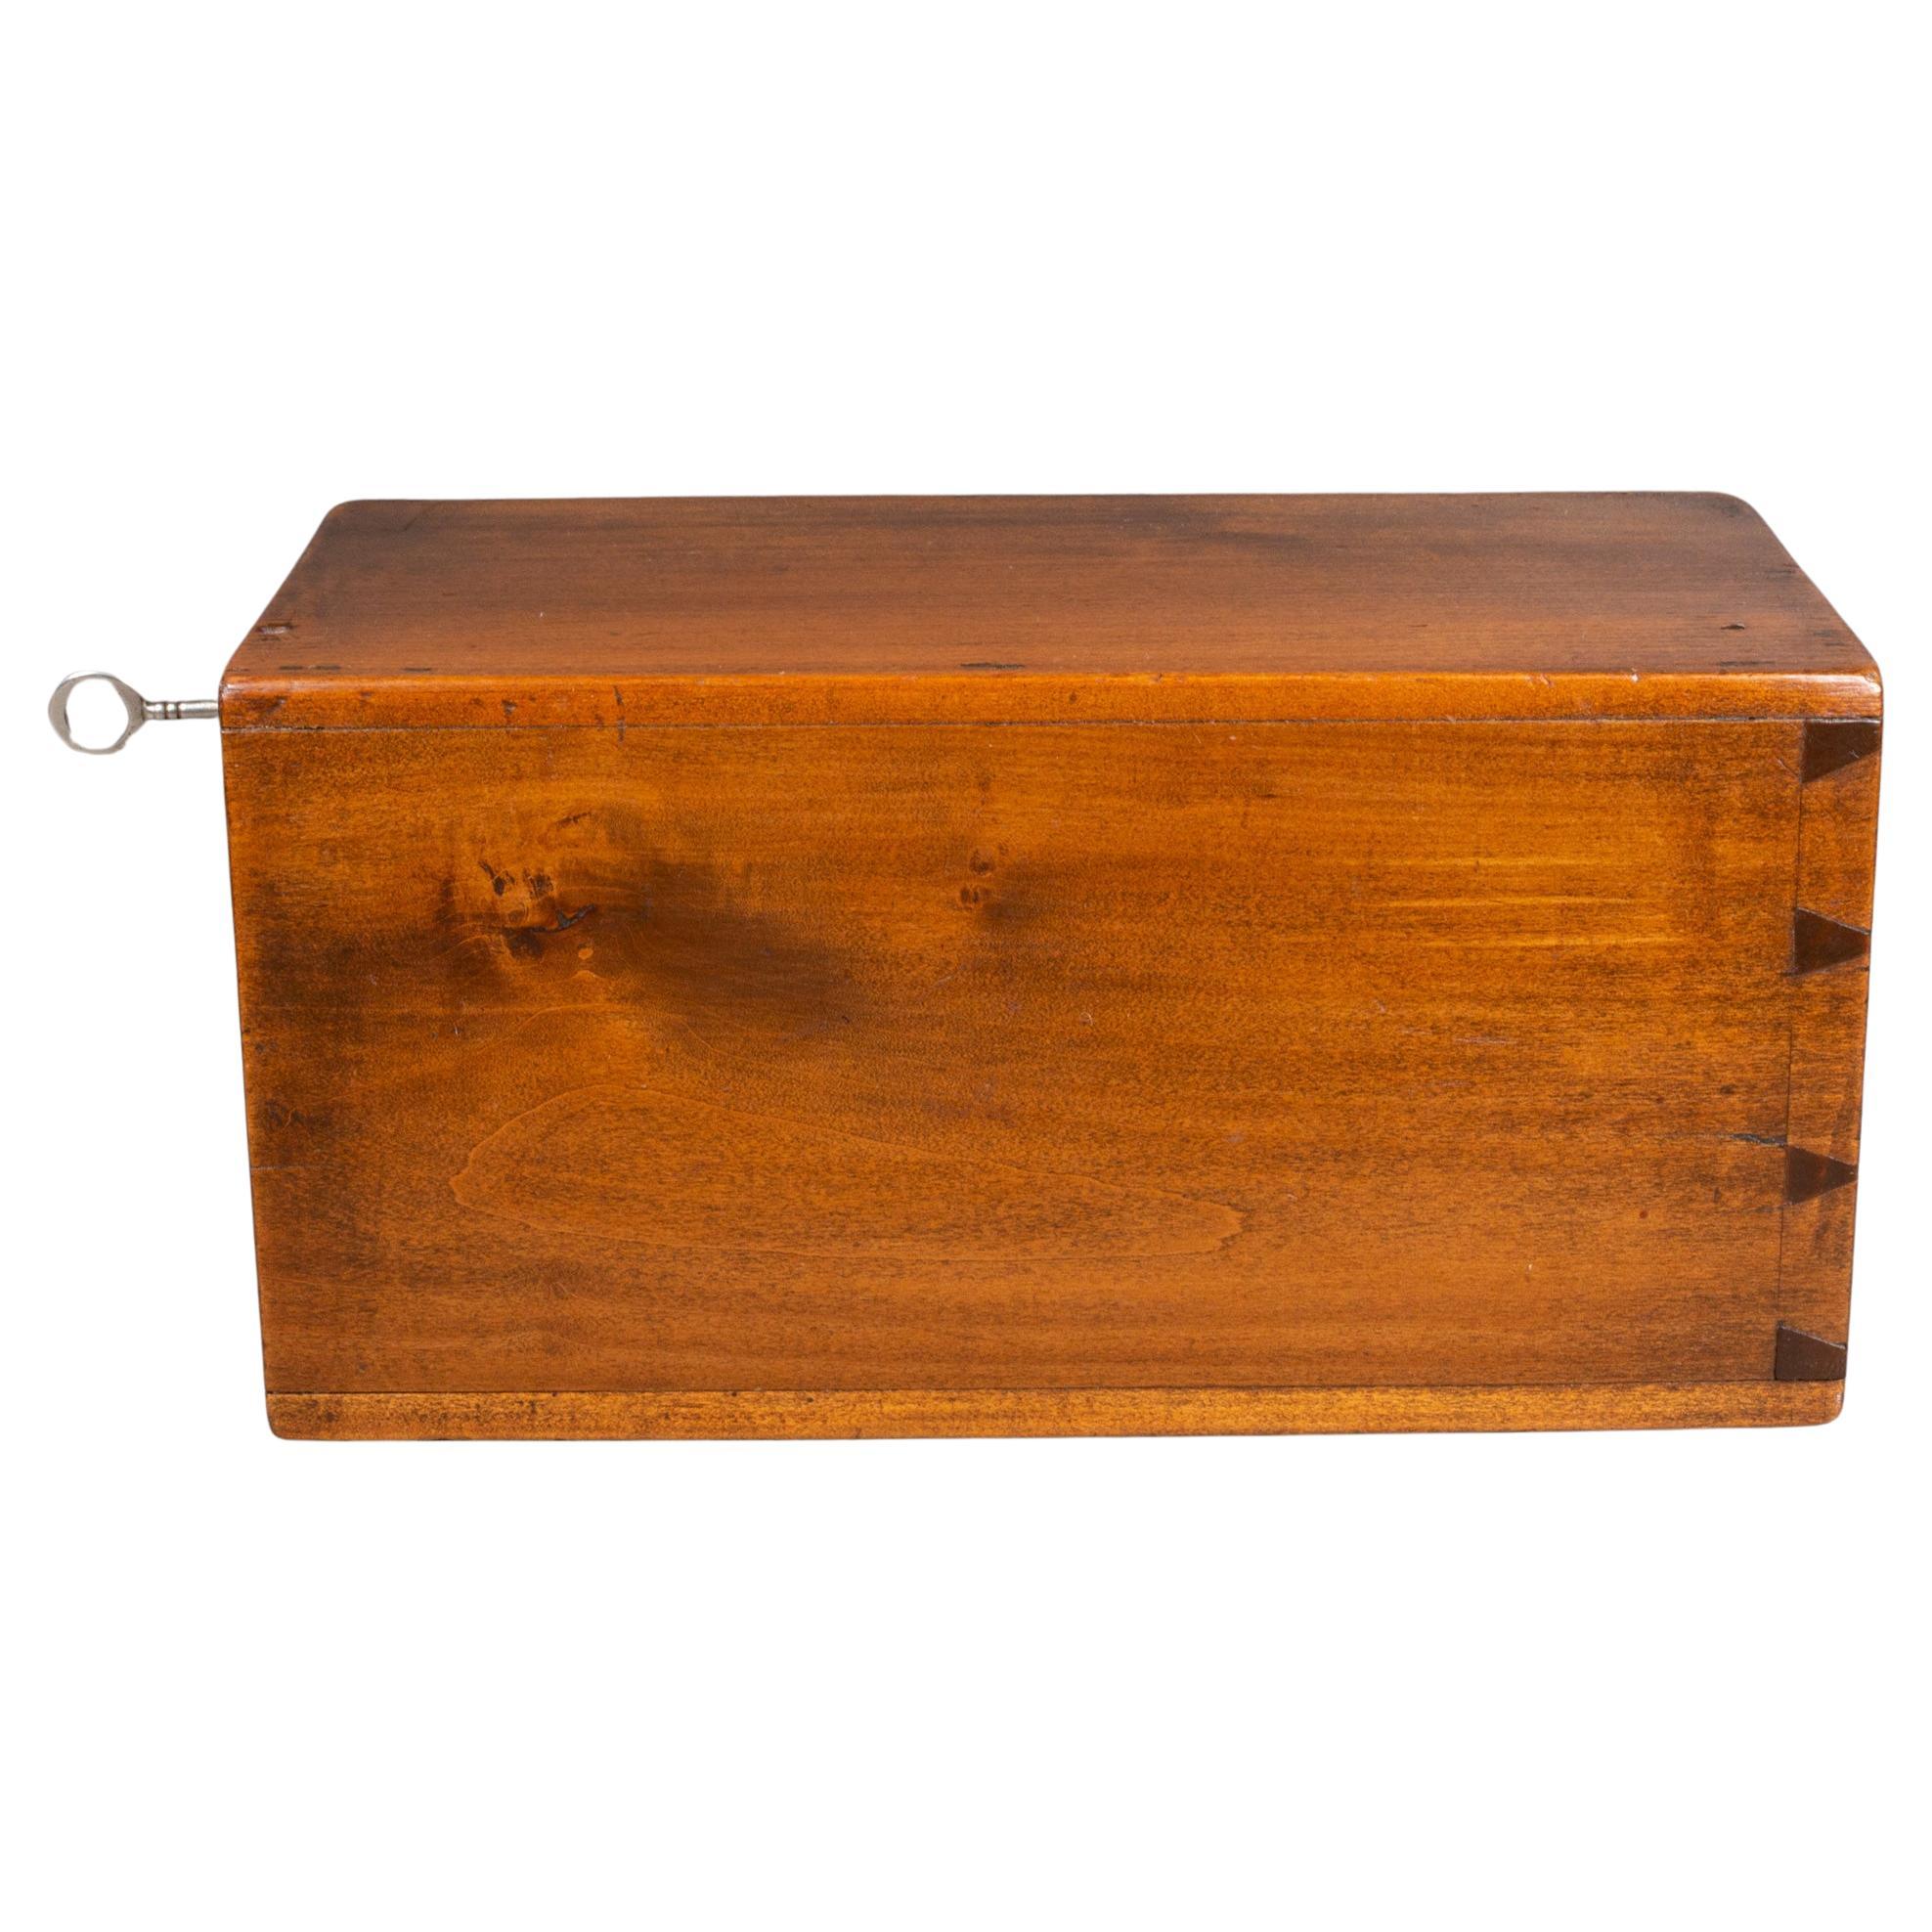 Signed Mid-19th c. Wooden Lock Box c.1863 For Sale